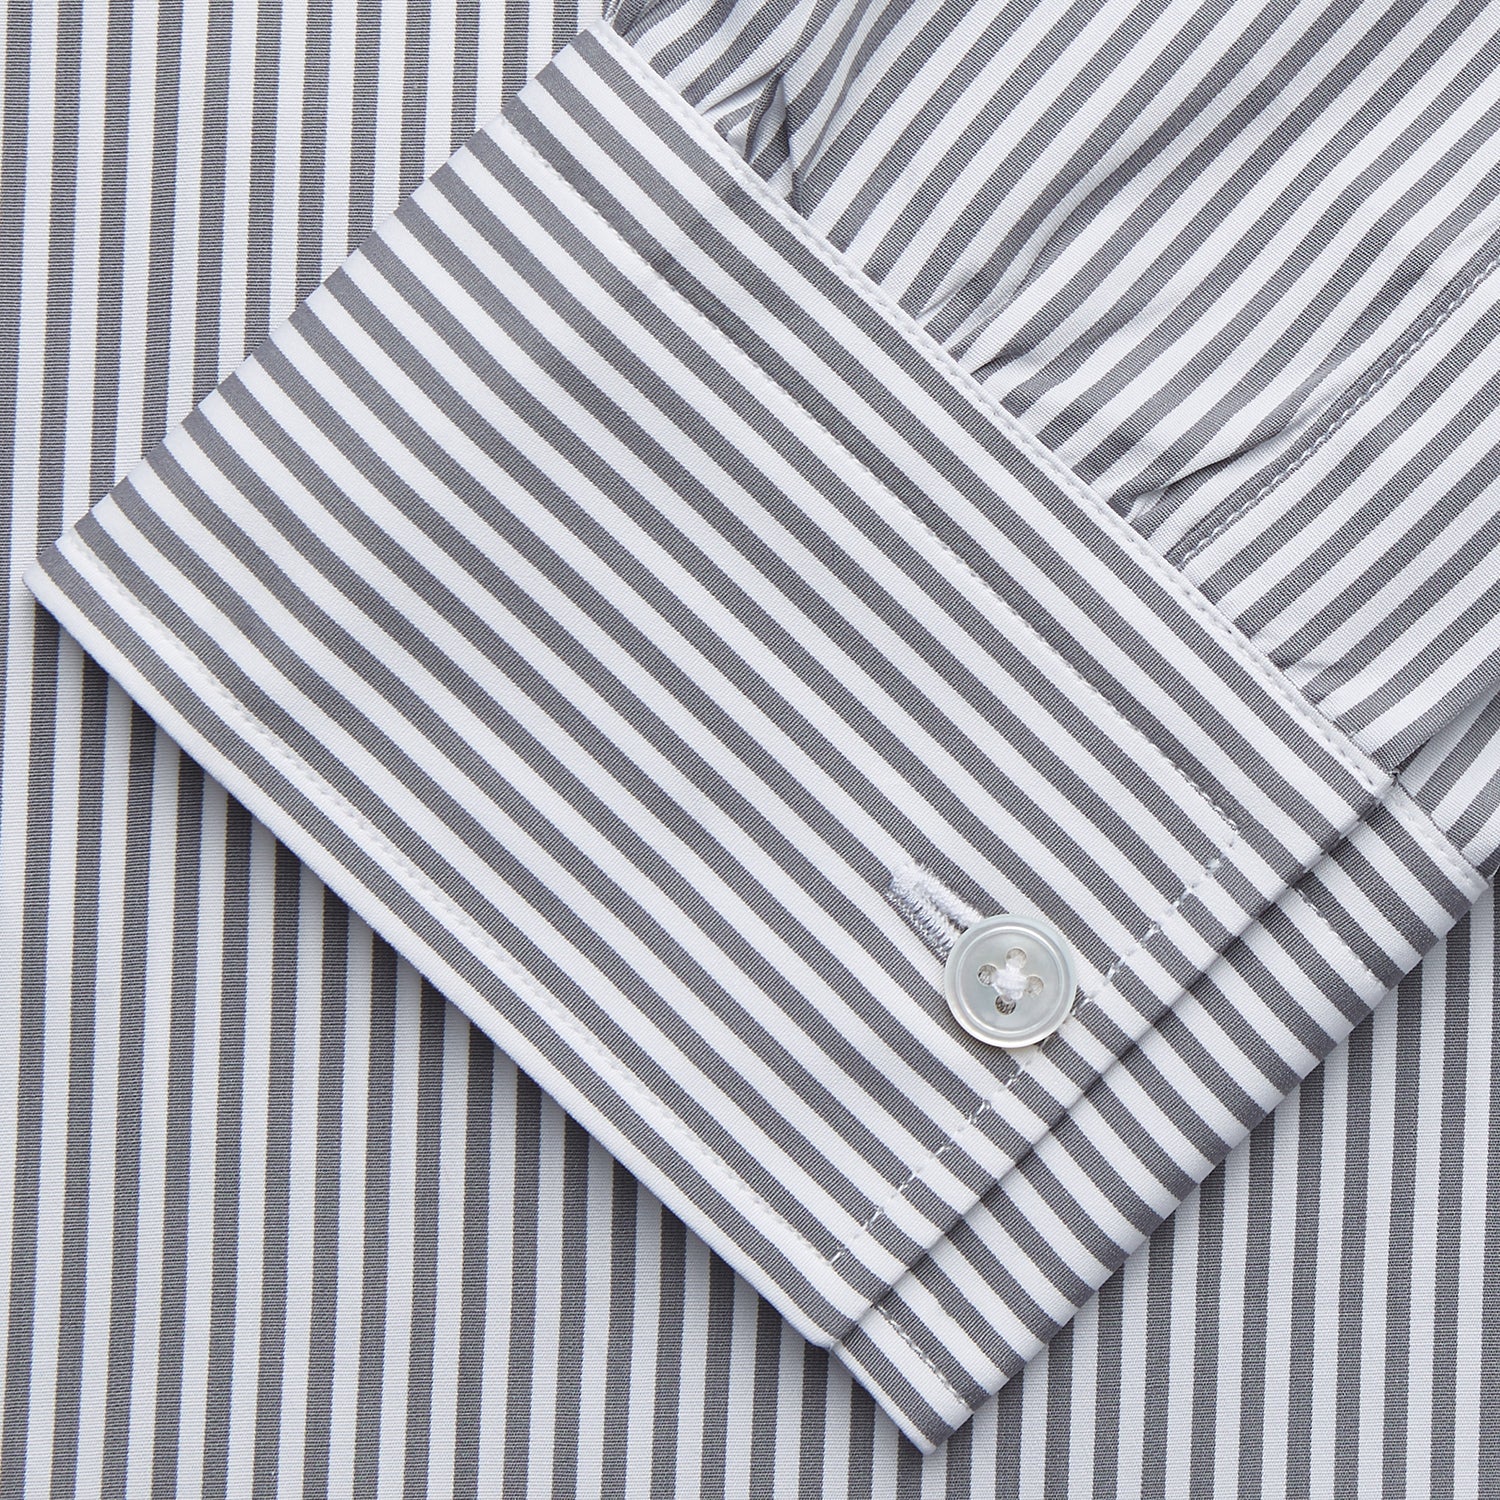 Grey & White Stripe Weekend Fit Shirt with Derby Collar and 1 Button Cuffs